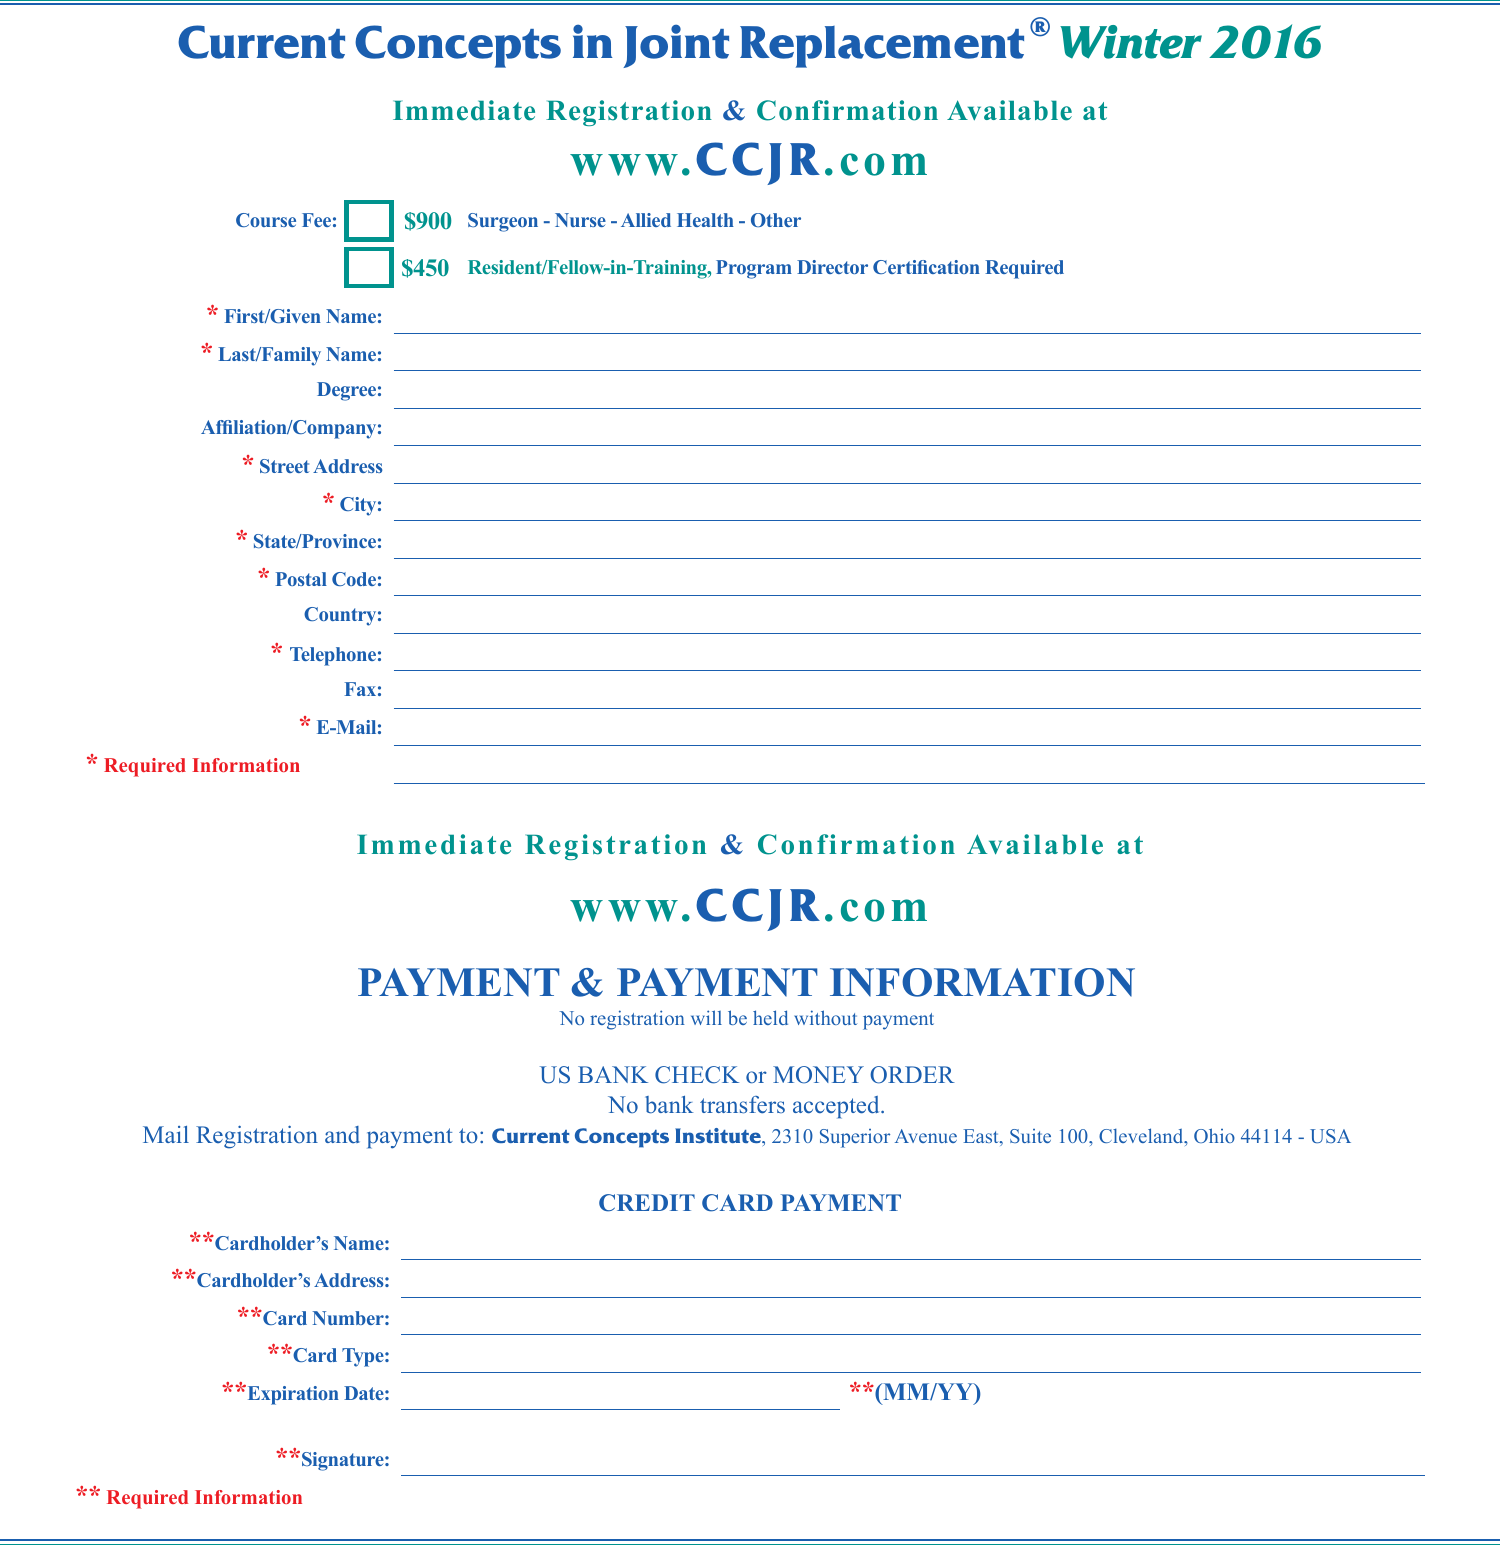 Page 9 of 9 - W16 Course Program Registration Form